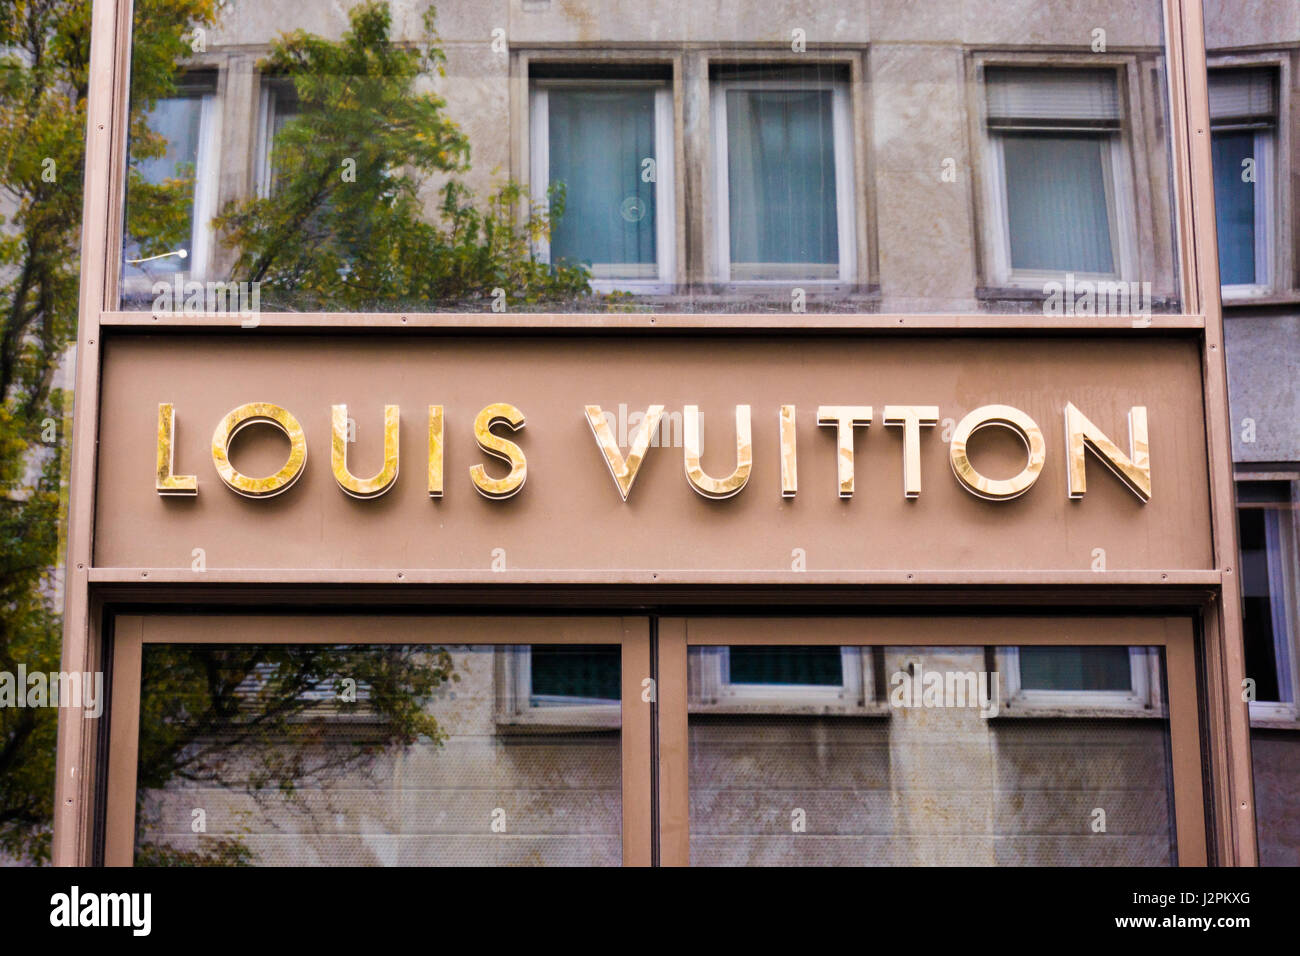 Louis Vuitton Frankfurt High Resolution Stock Photography and Images - Alamy